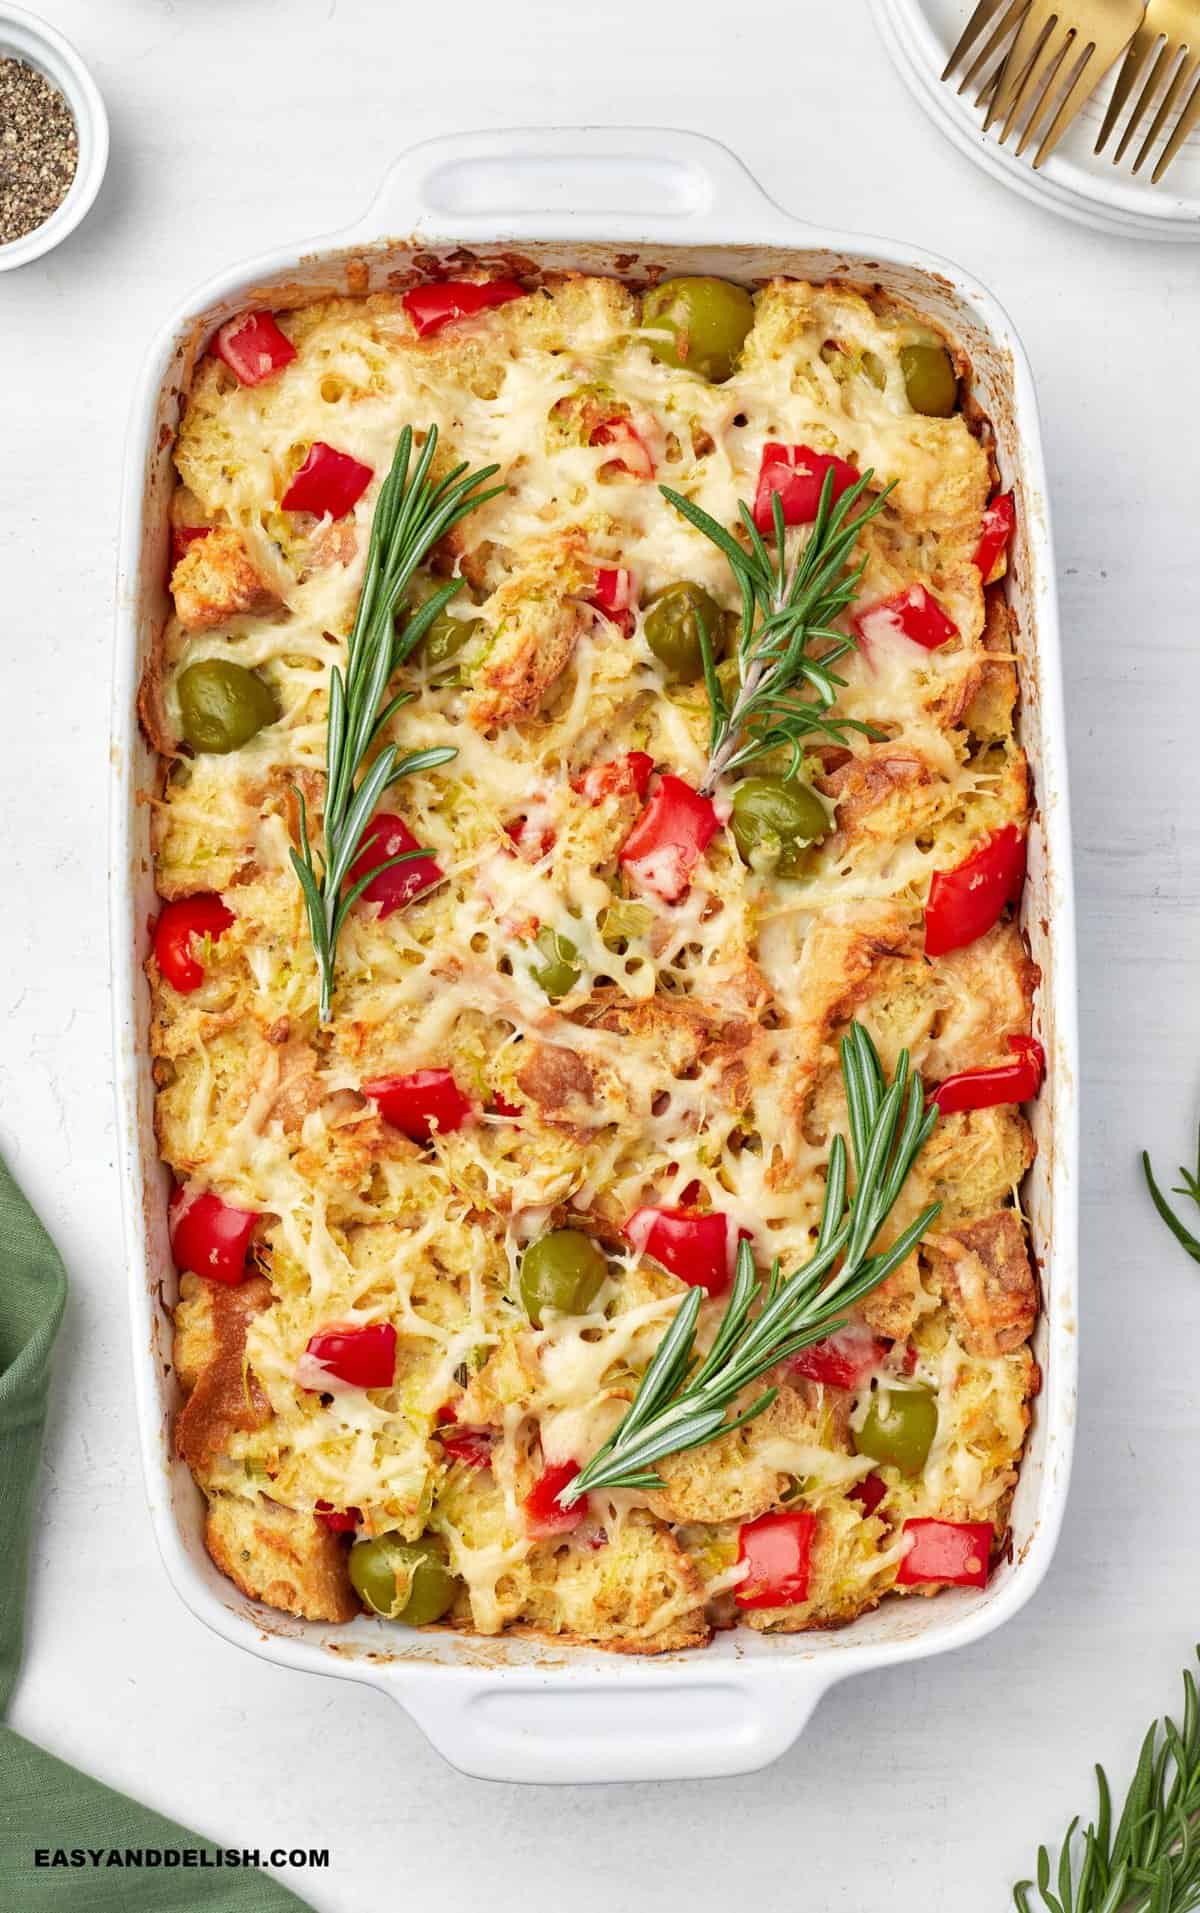 vegetarian savory bread pudding with garnishes on top and around.